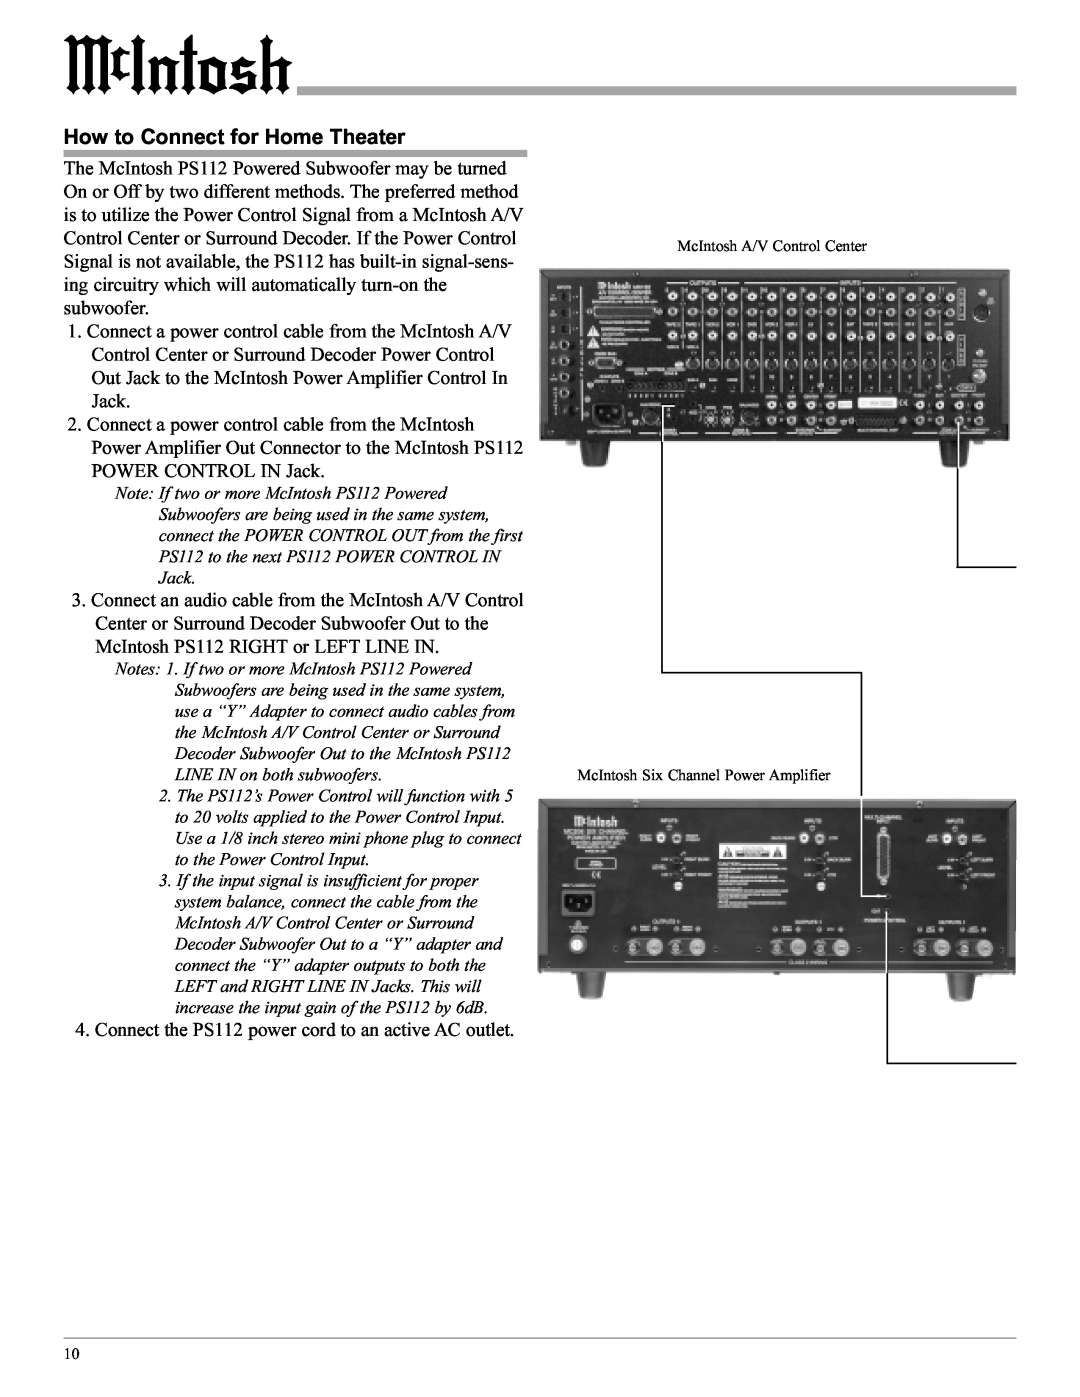 McIntosh PS112 manual How to Connect for Home Theater, McIntosh A/V Control Center, McIntosh Six Channel Power Amplifier 